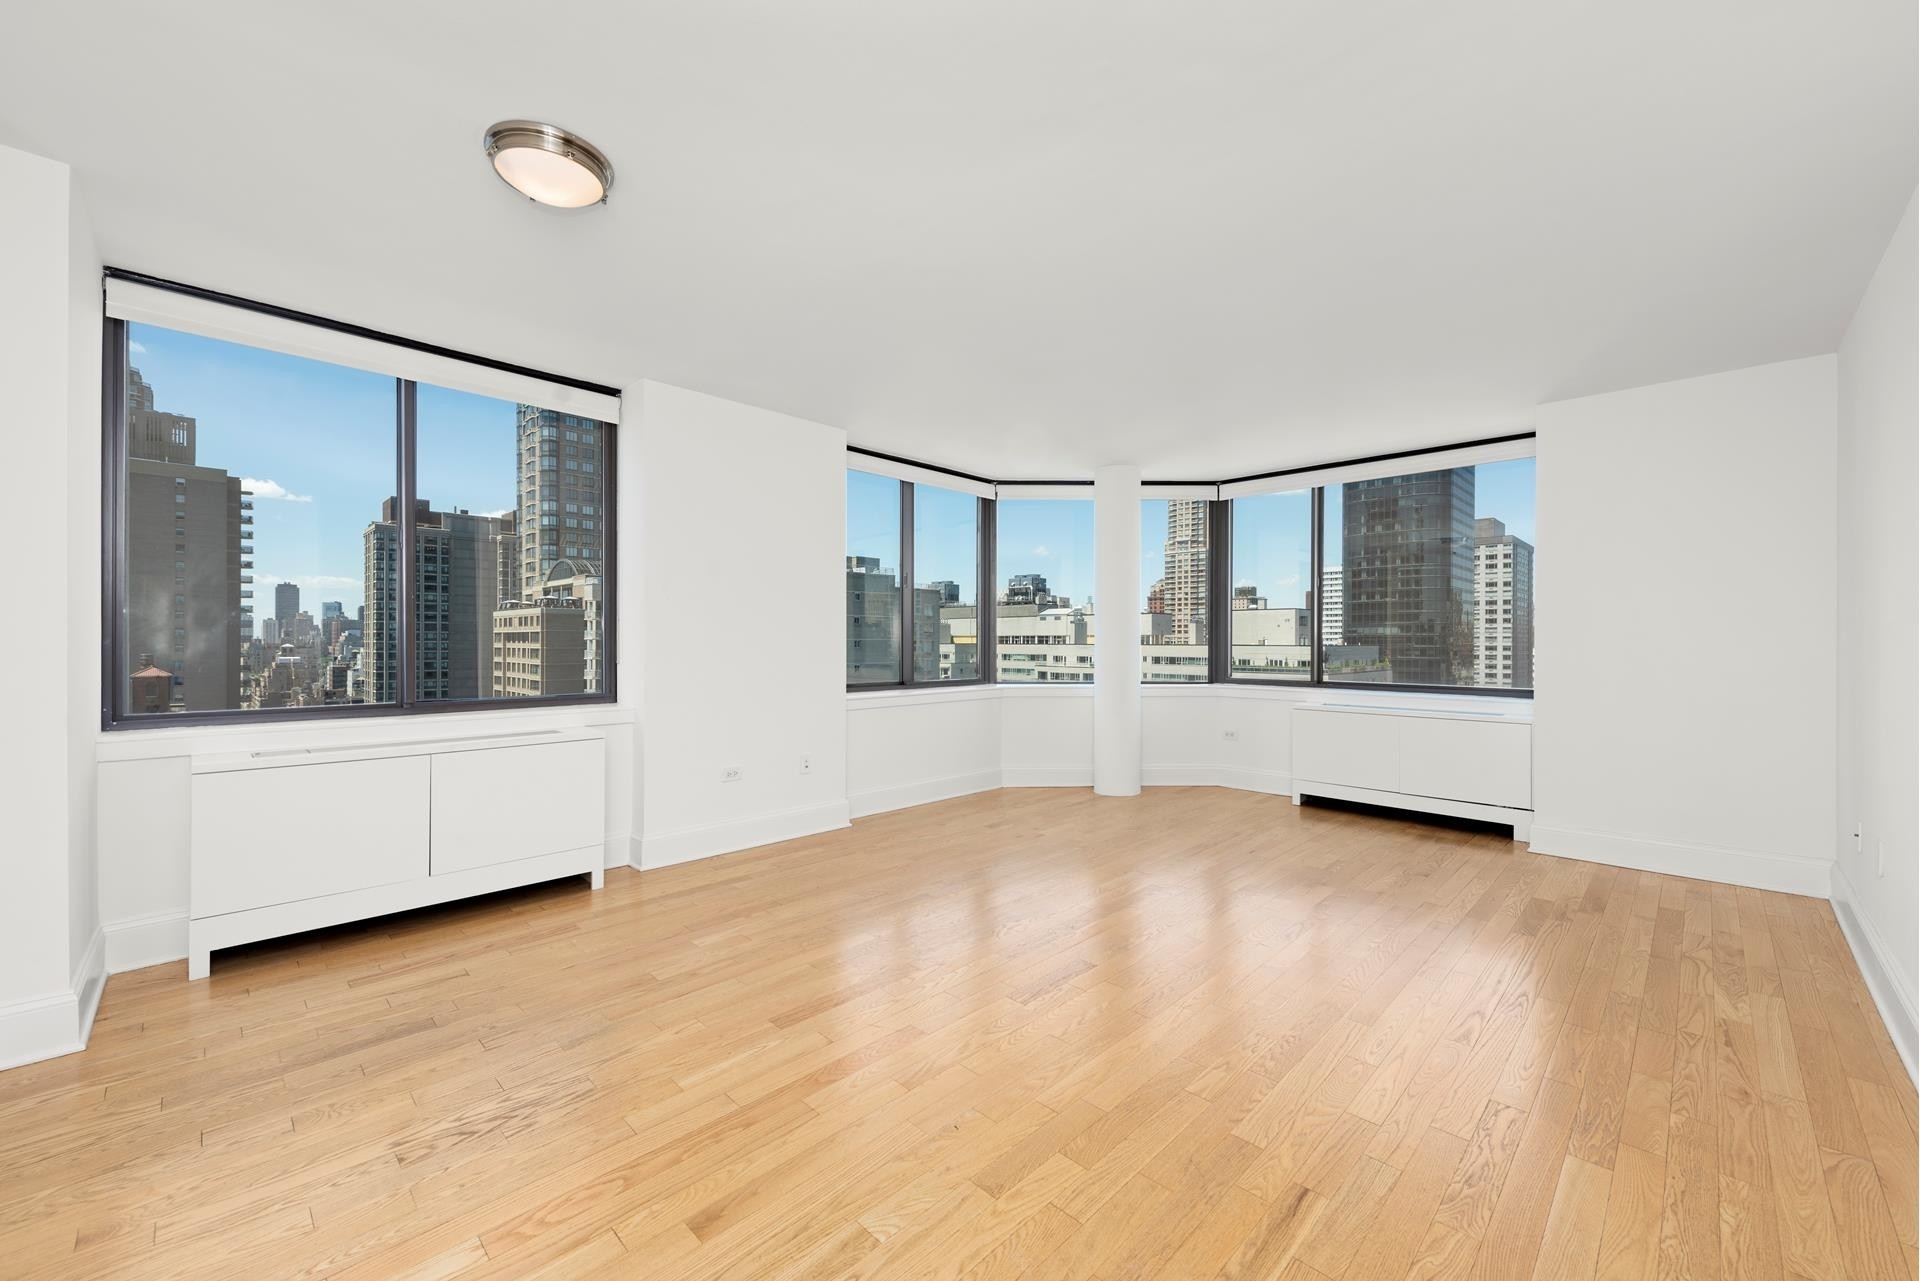 Property at 300 East 64th St, 24B New York